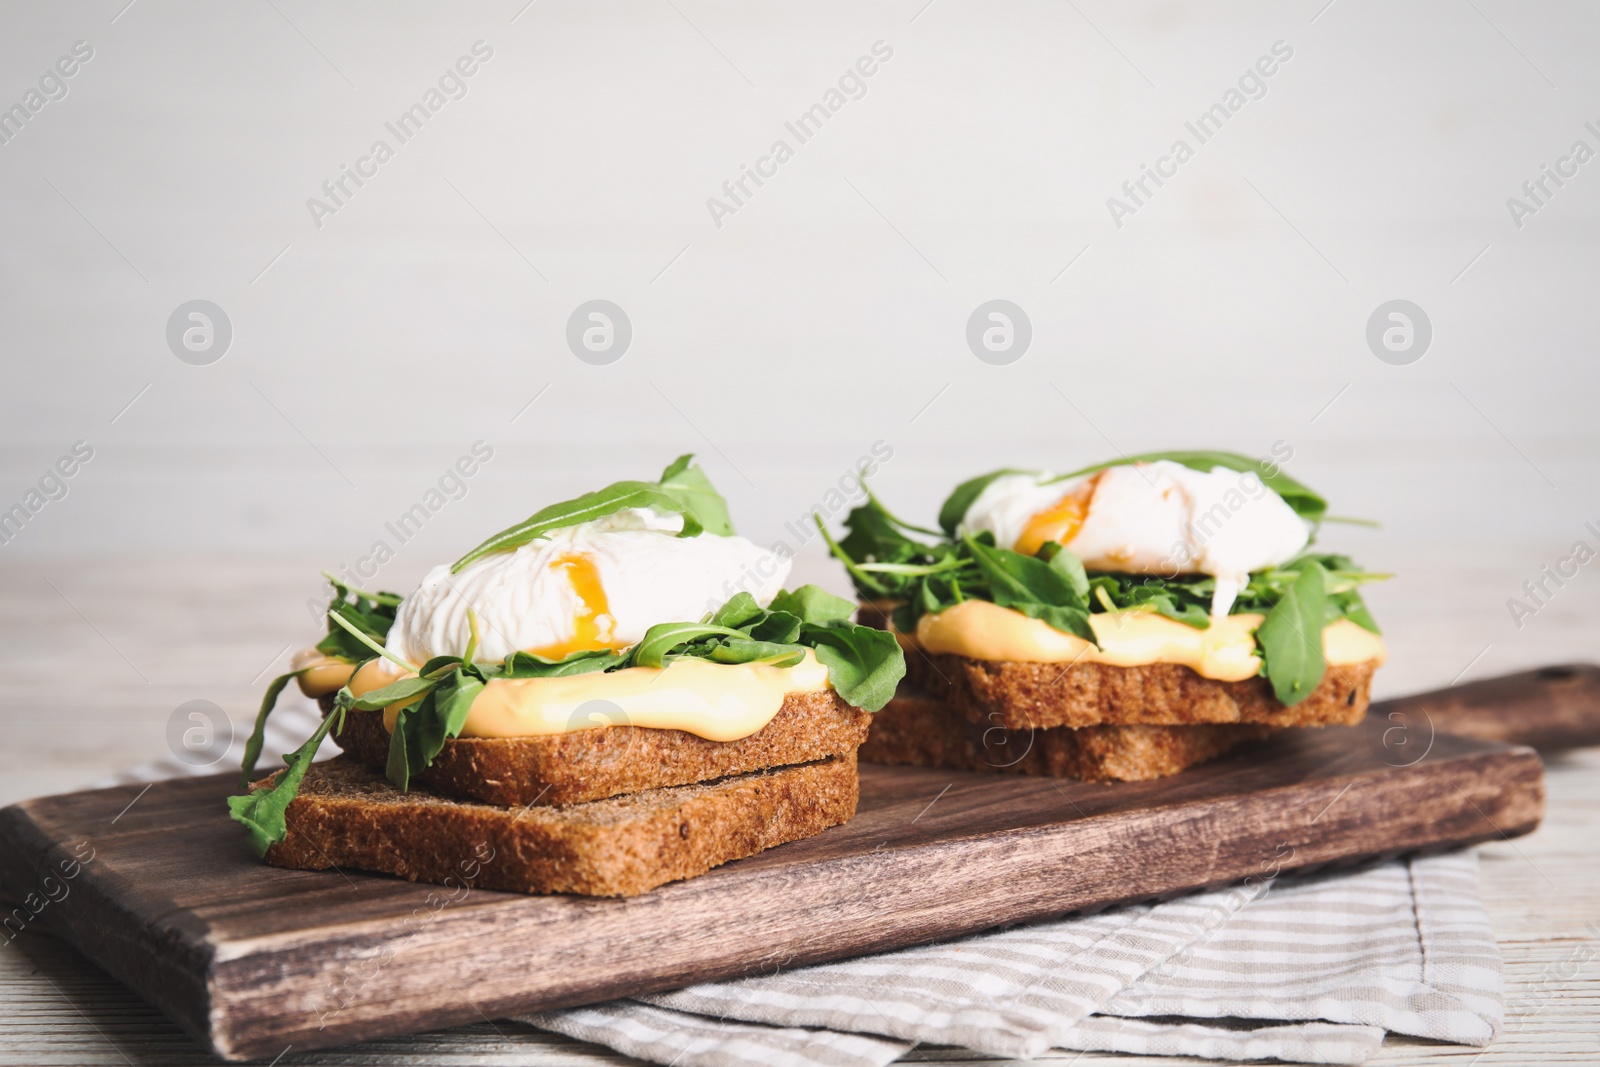 Photo of Delicious sandwiches with arugula and egg on white wooden table